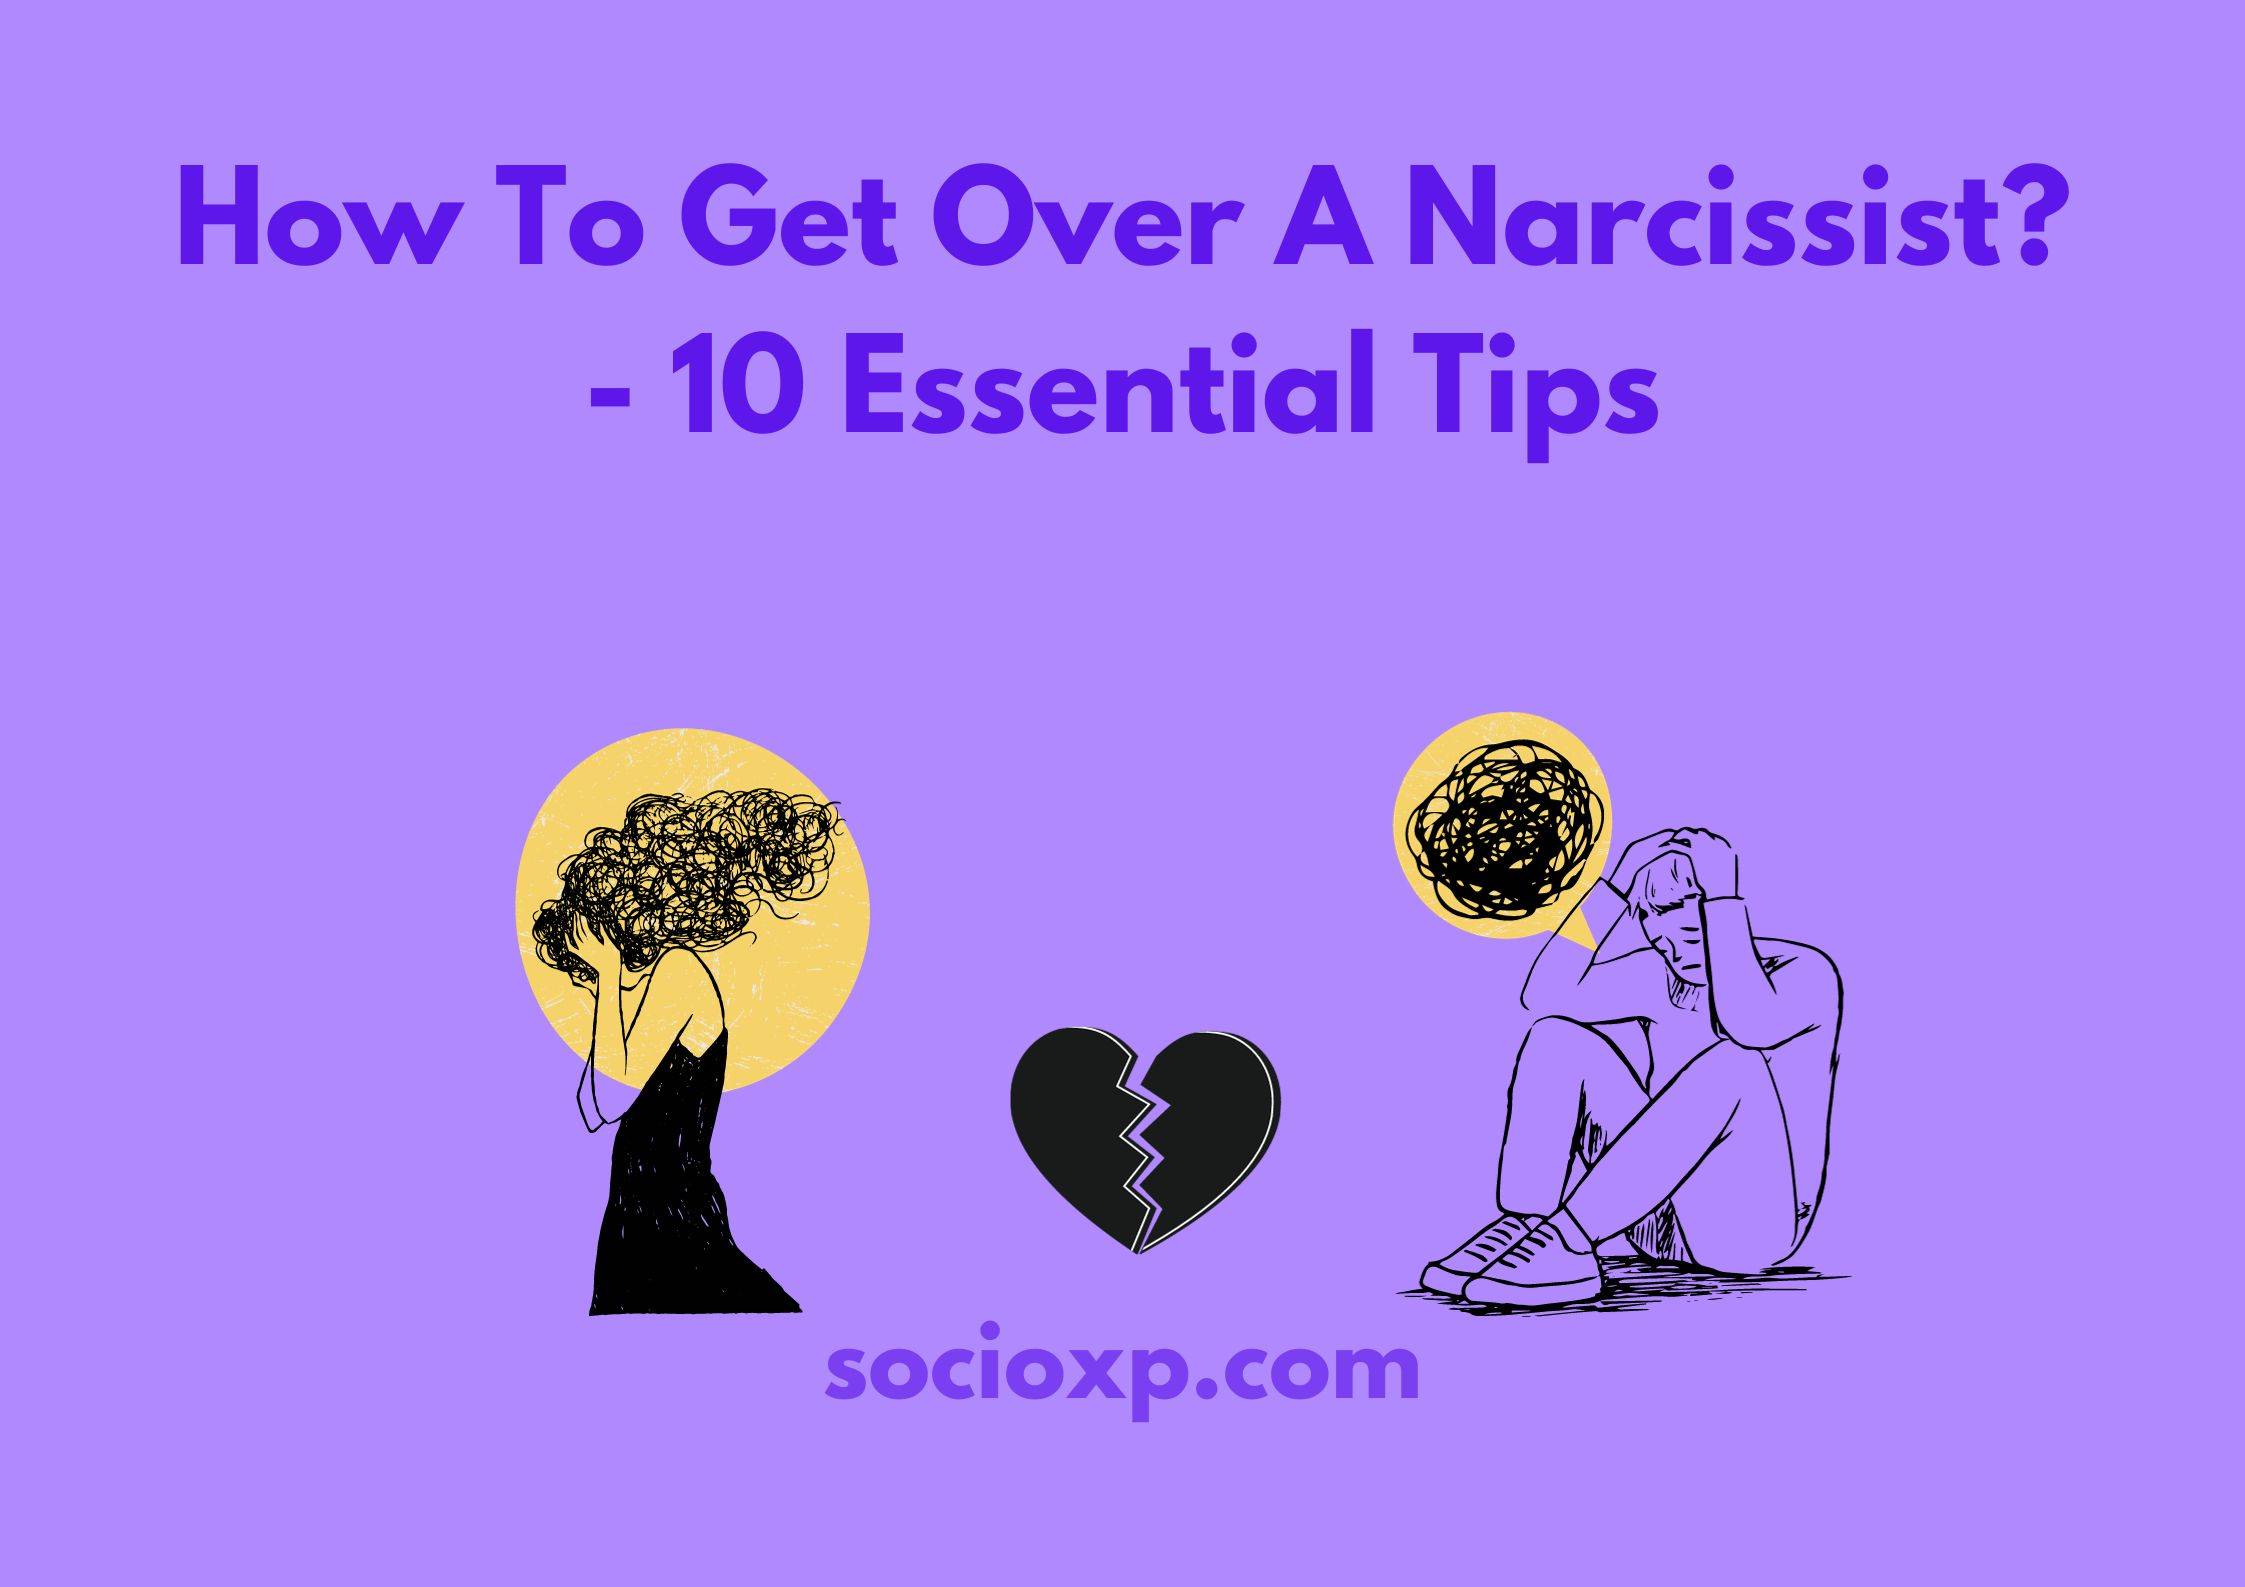 How To Get Over A Narcissist? - 10 Essential Tips